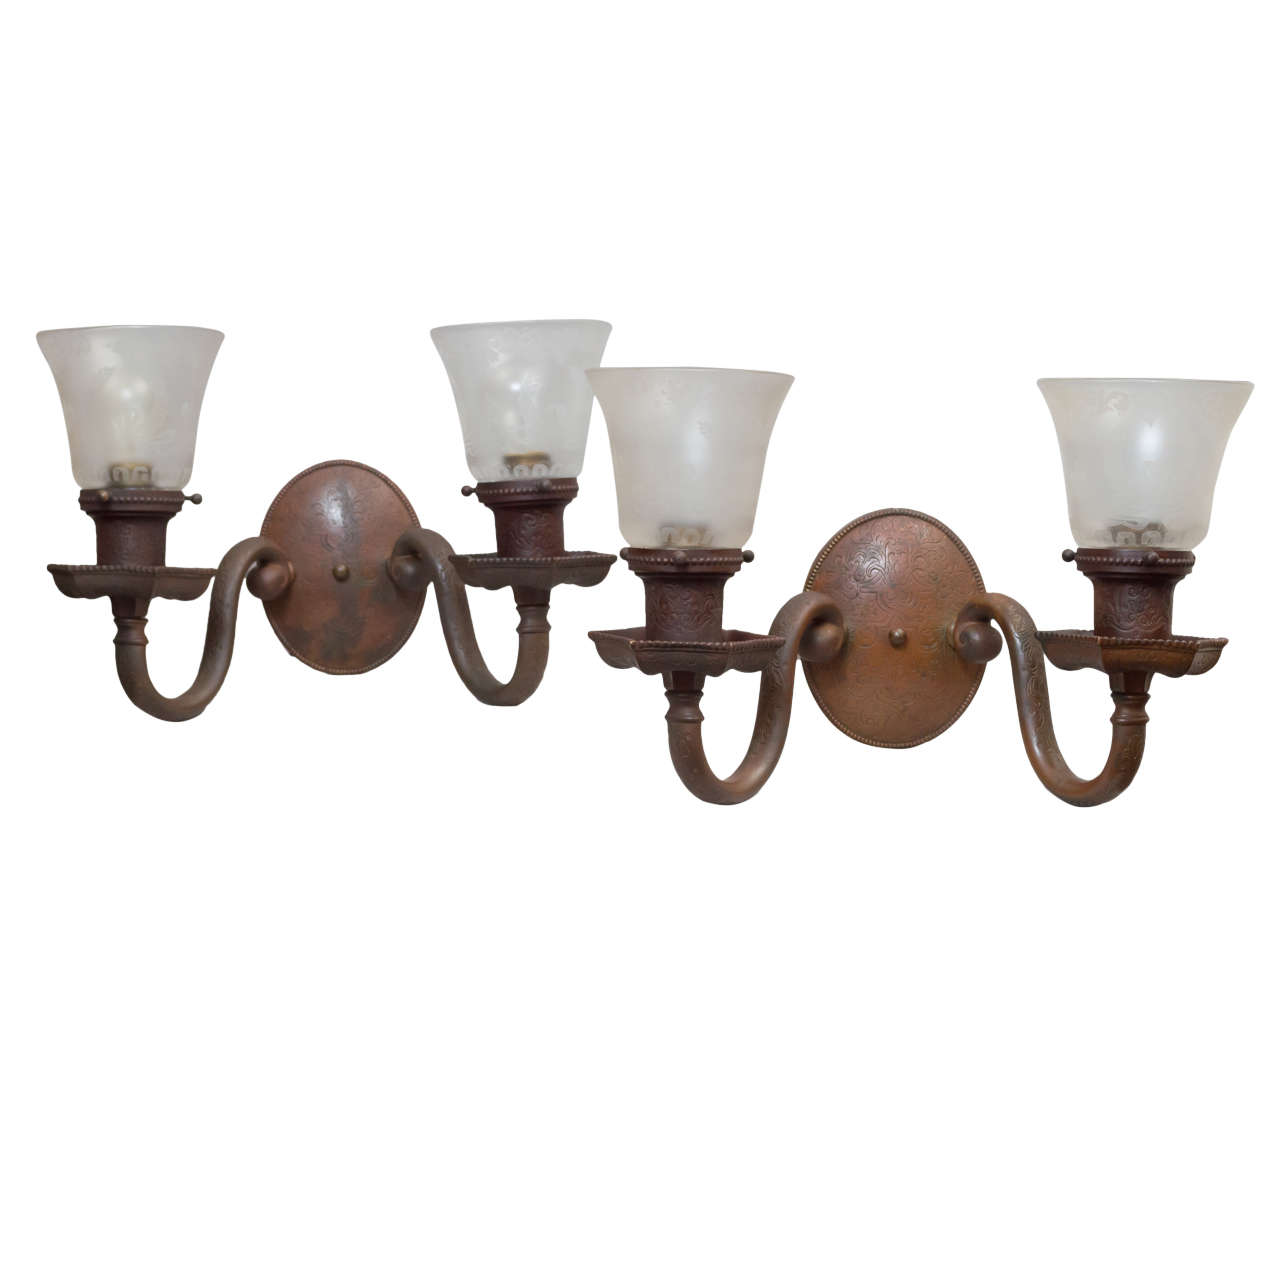 High Quality Cast Bronze Sconces w/ Deep Etched Glass Shades